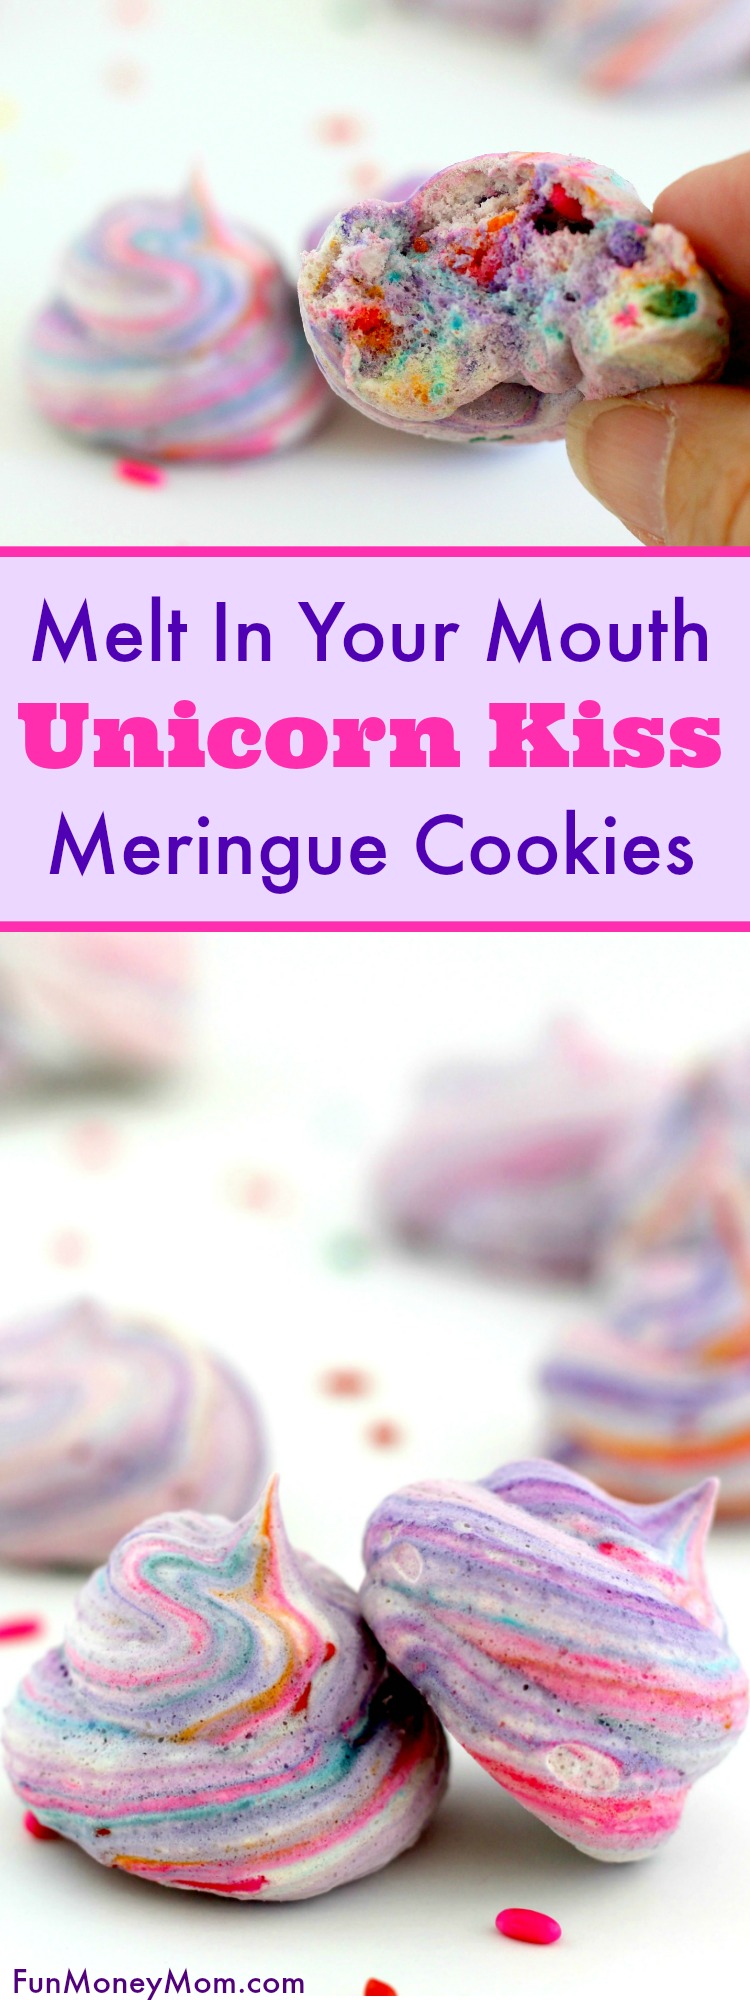 These Unicorn Kiss Meringue Cookies are perfect for a party or just a fun treat. Just don't expect these melt in your mouth sweets to last very long!